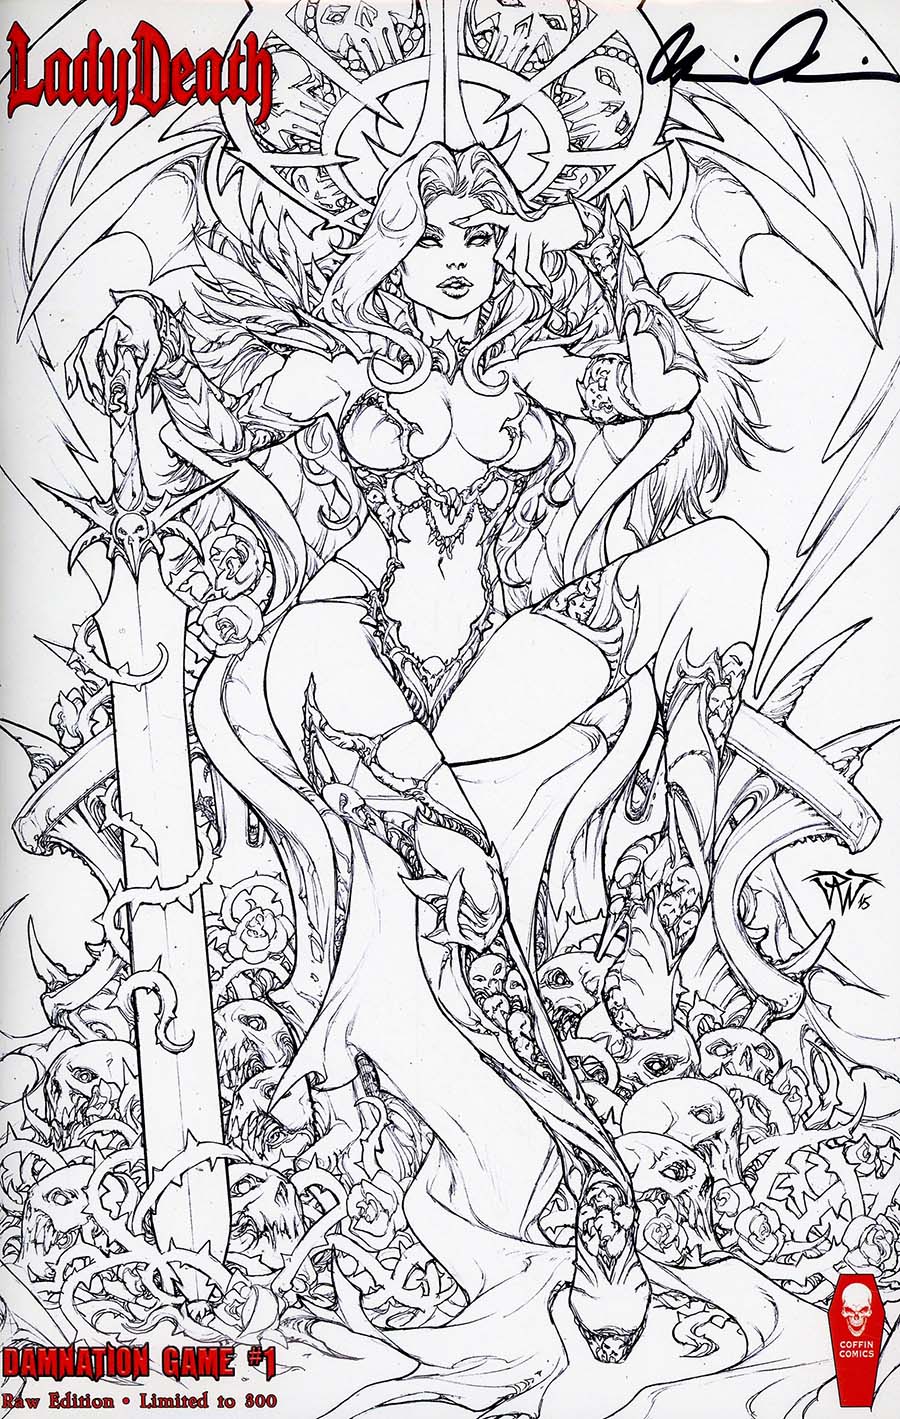 Lady Death Damnation Game #1 Cover G Raw Edition Signed & Numbered